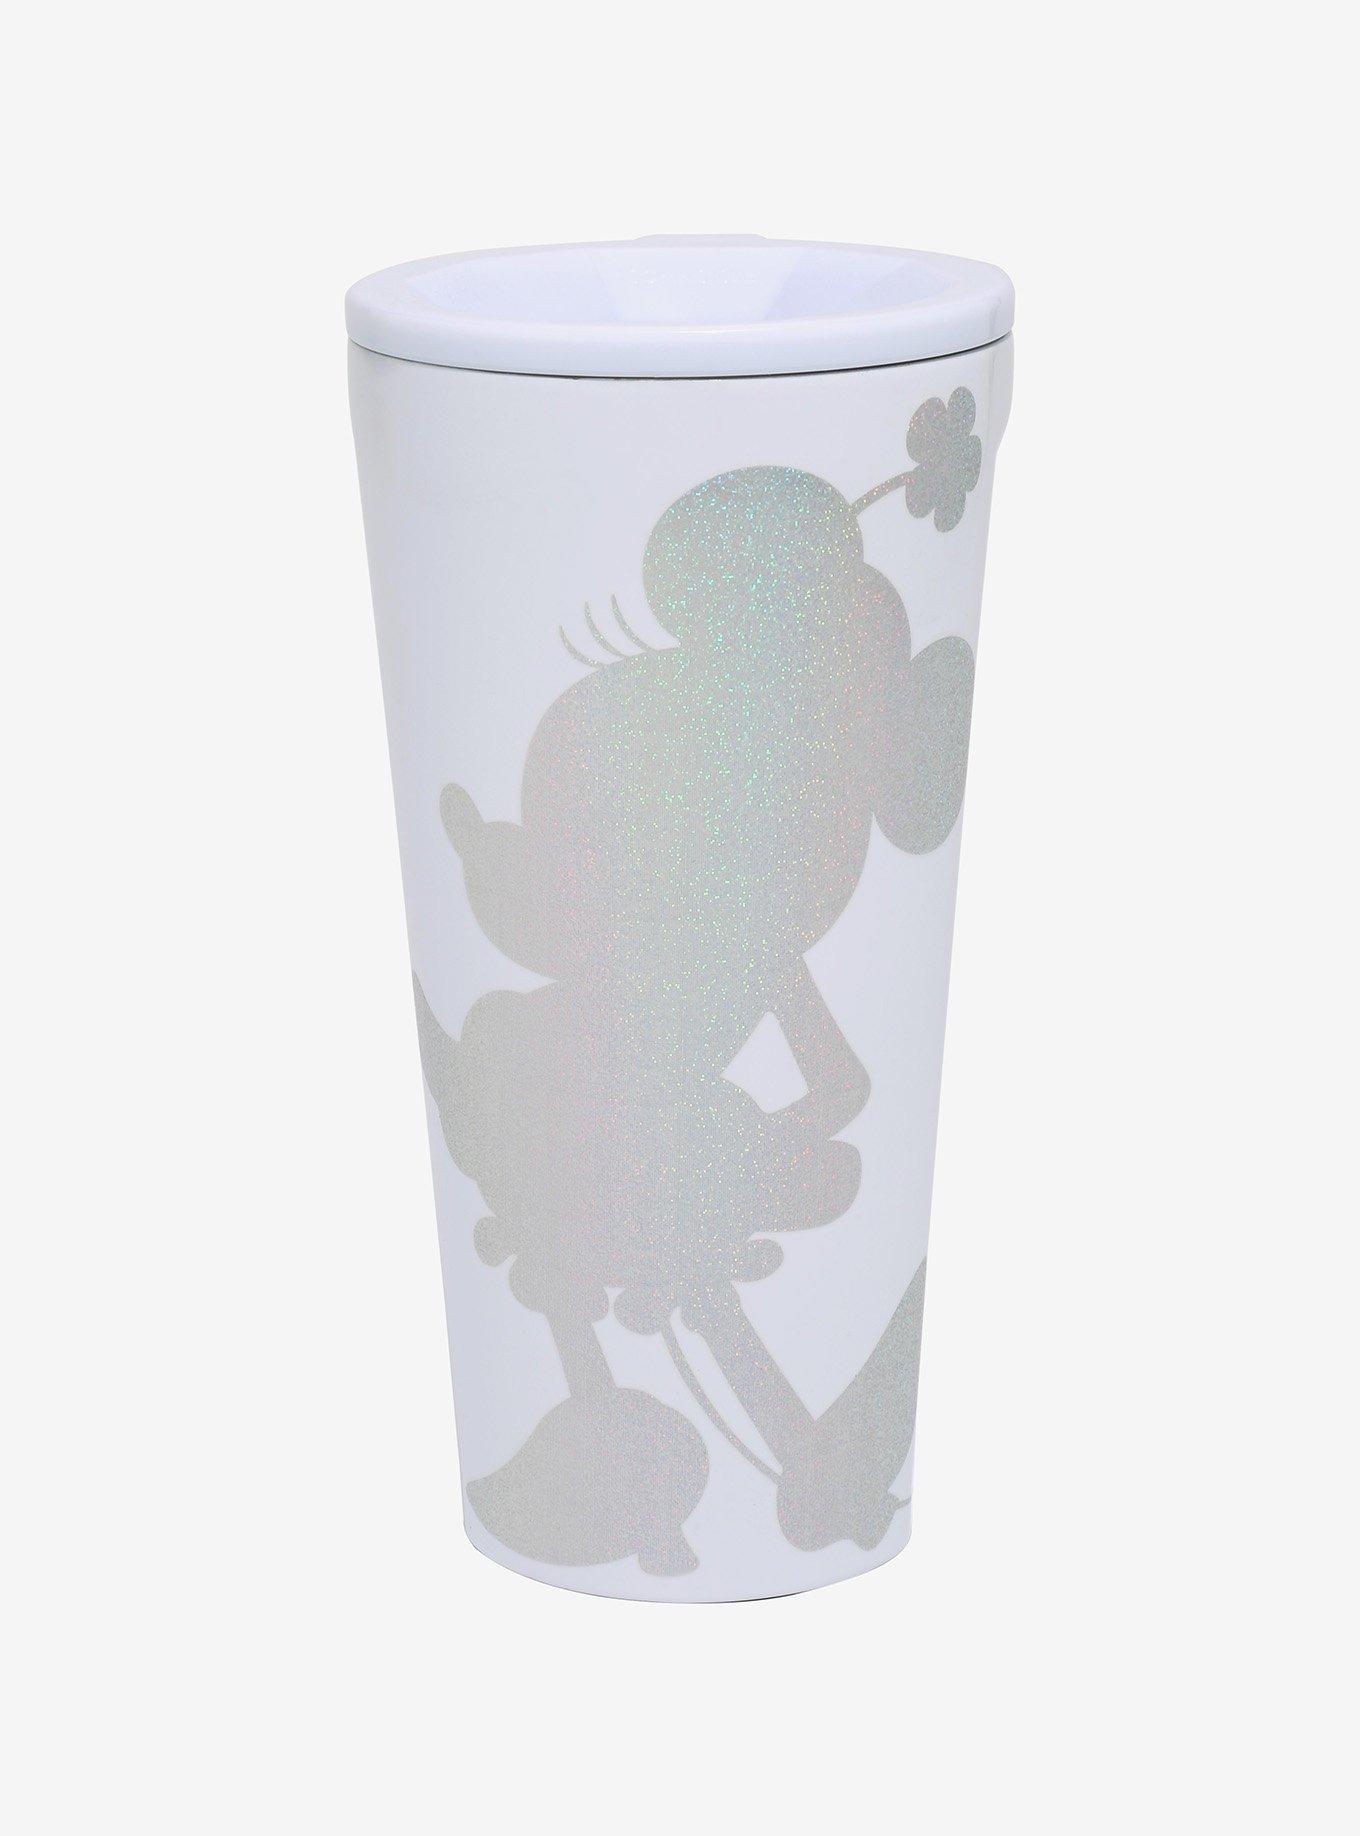 Disney Minnie Mouse Holographic Silhouette Stainless Steel Travel Mug, , hi-res